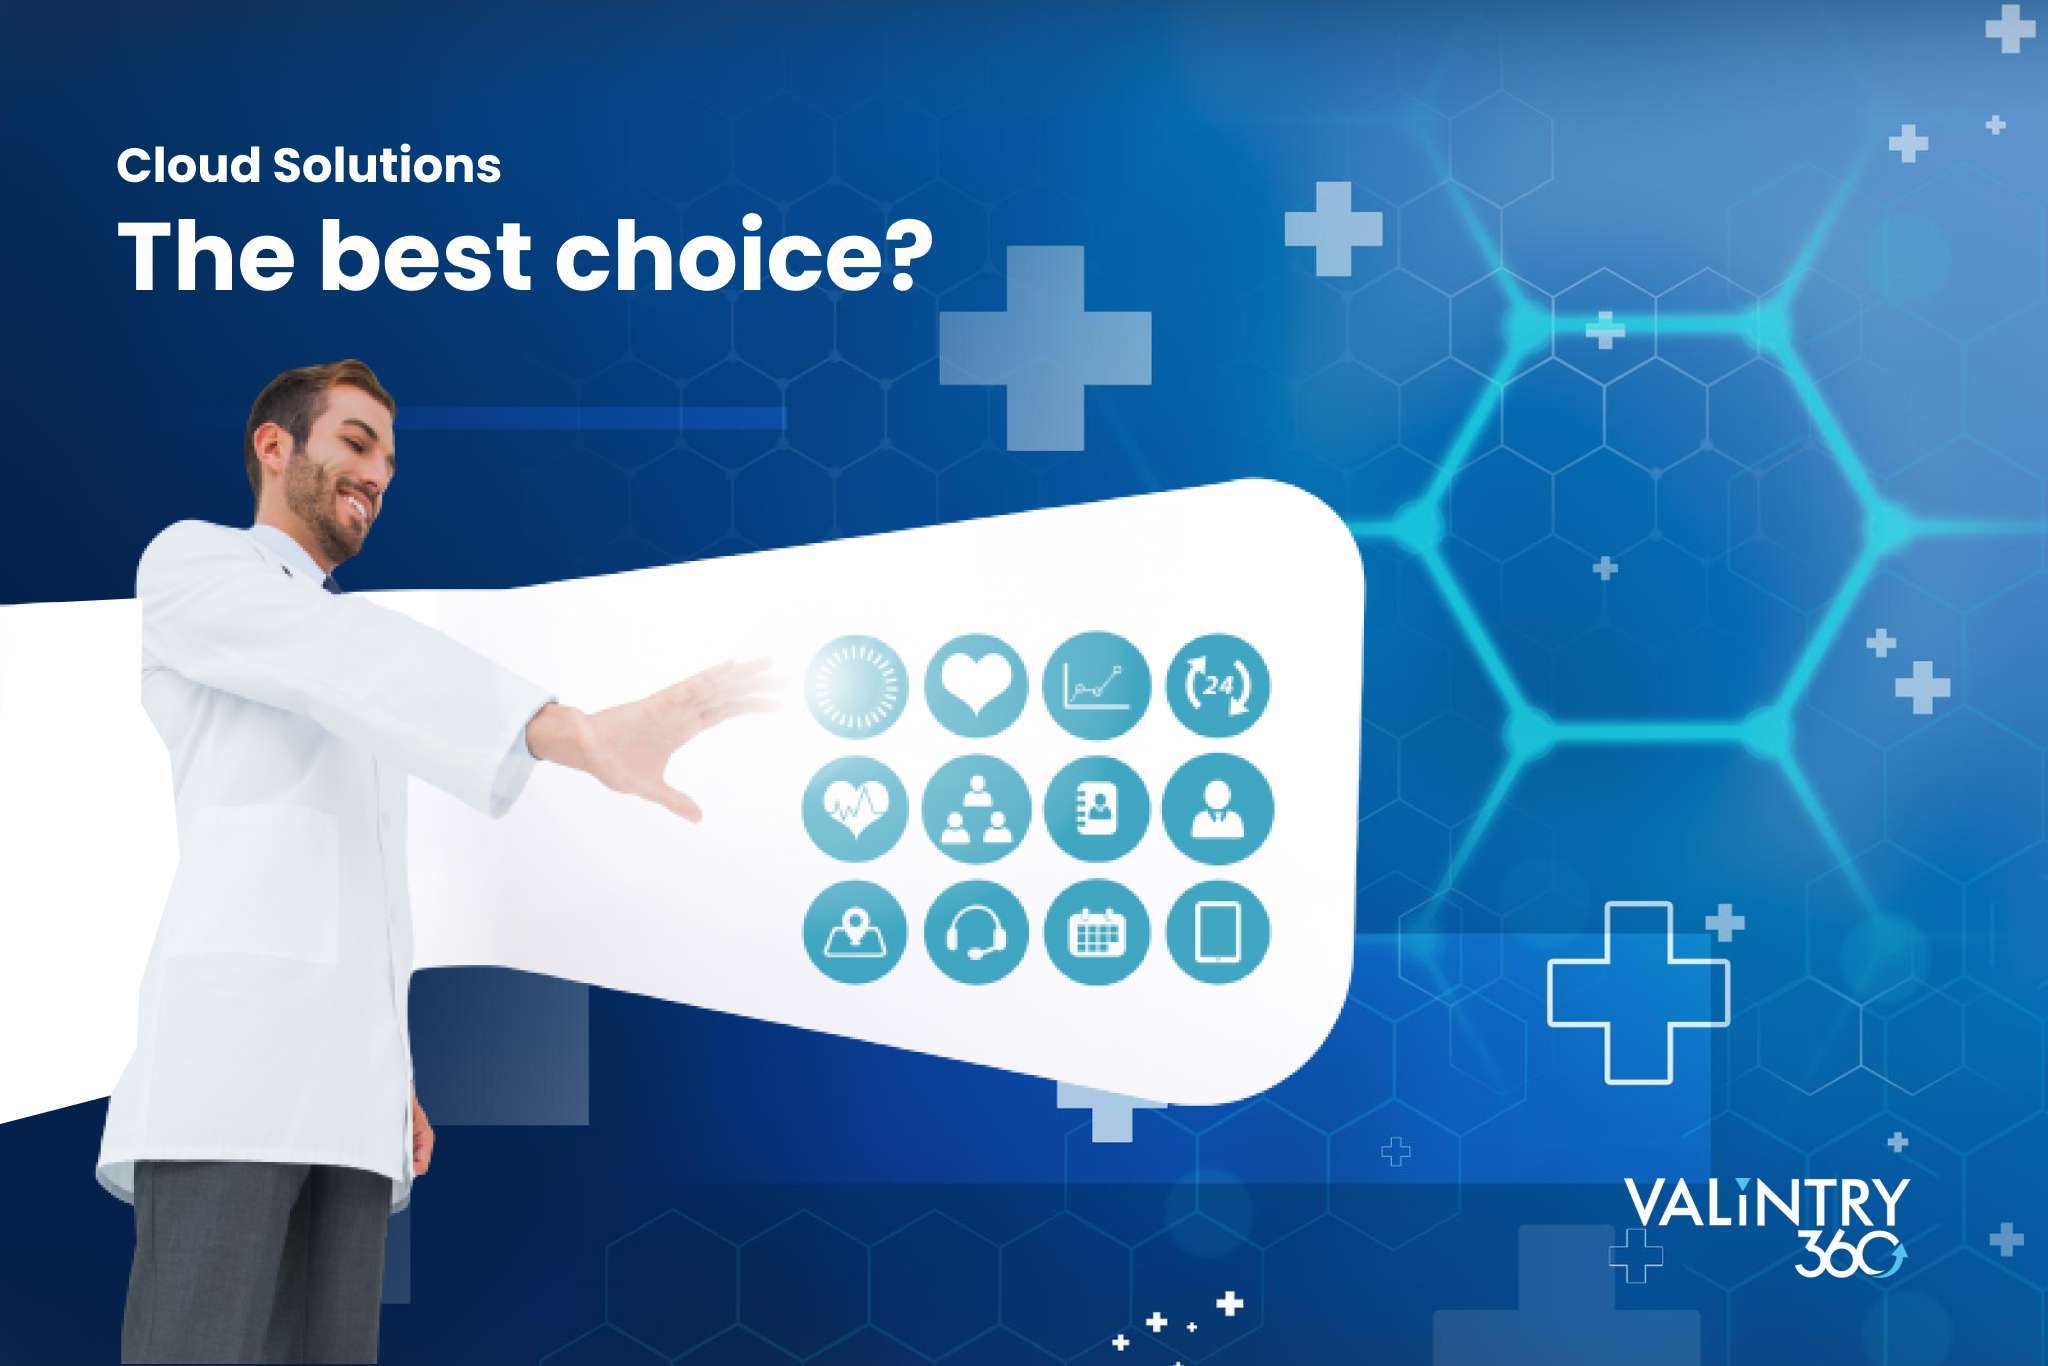 What makes VALiNTRY360's Salesforce Health Cloud Solutions the best choice